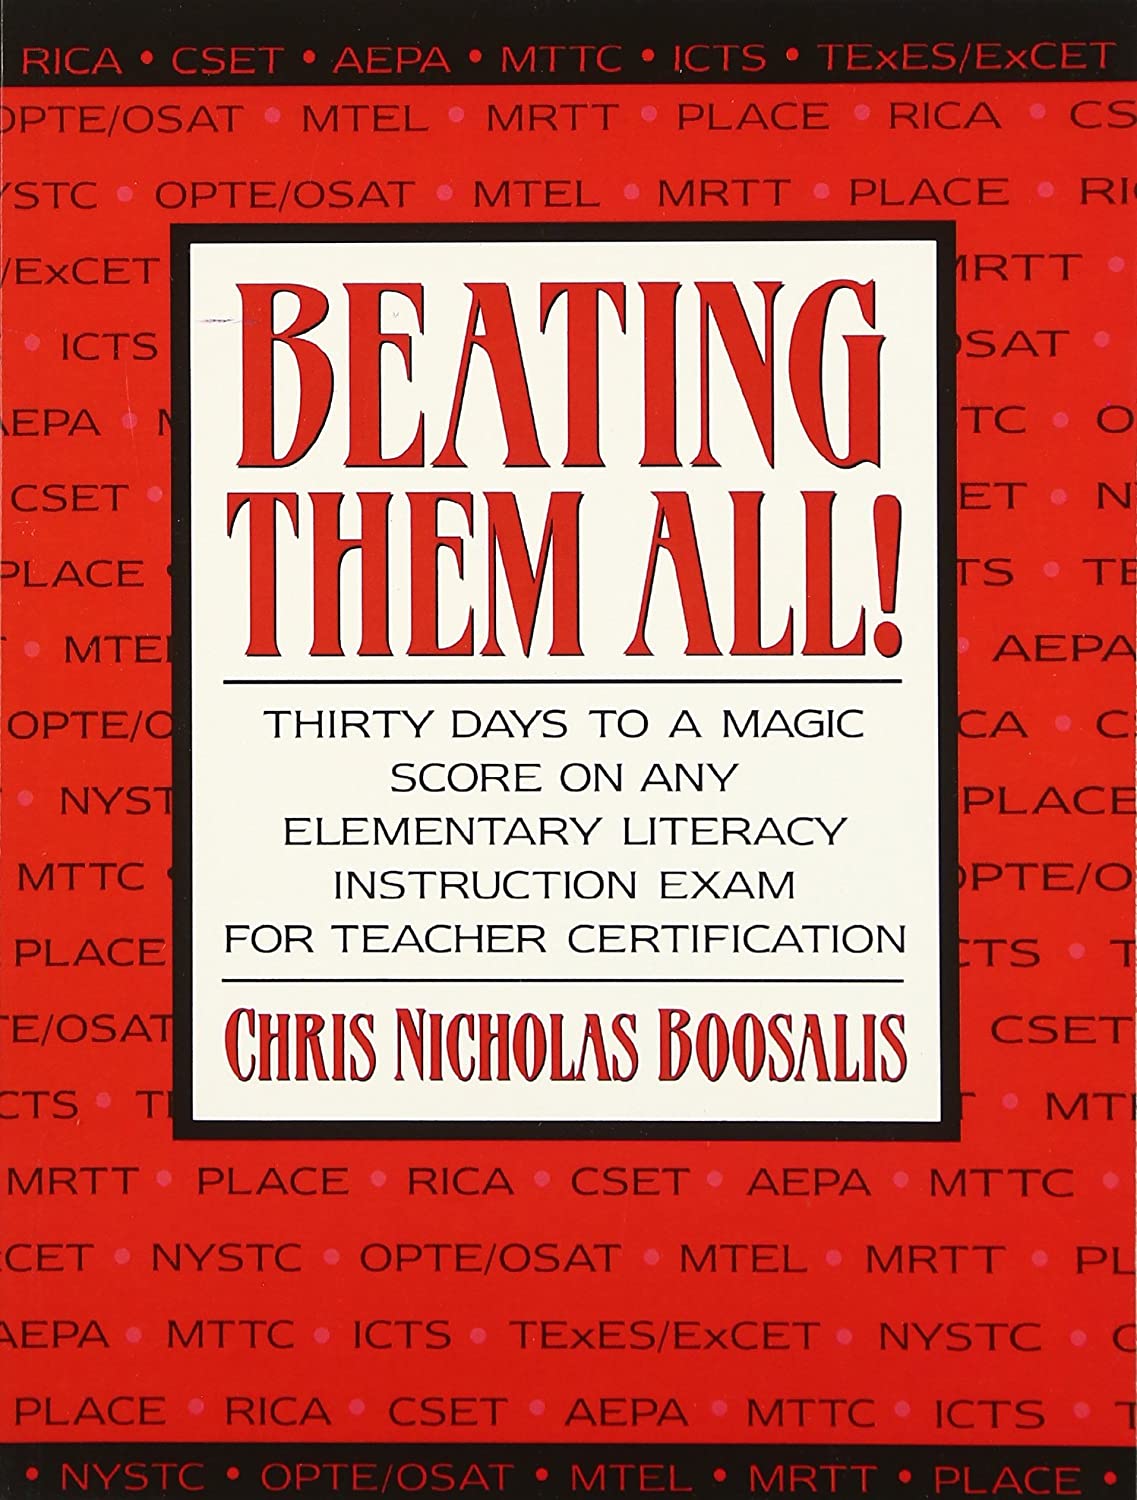 Beating Them All! Thirty Days to a Magic Score on Any Elementary Literacy Instruction Exam for Teacher Certification